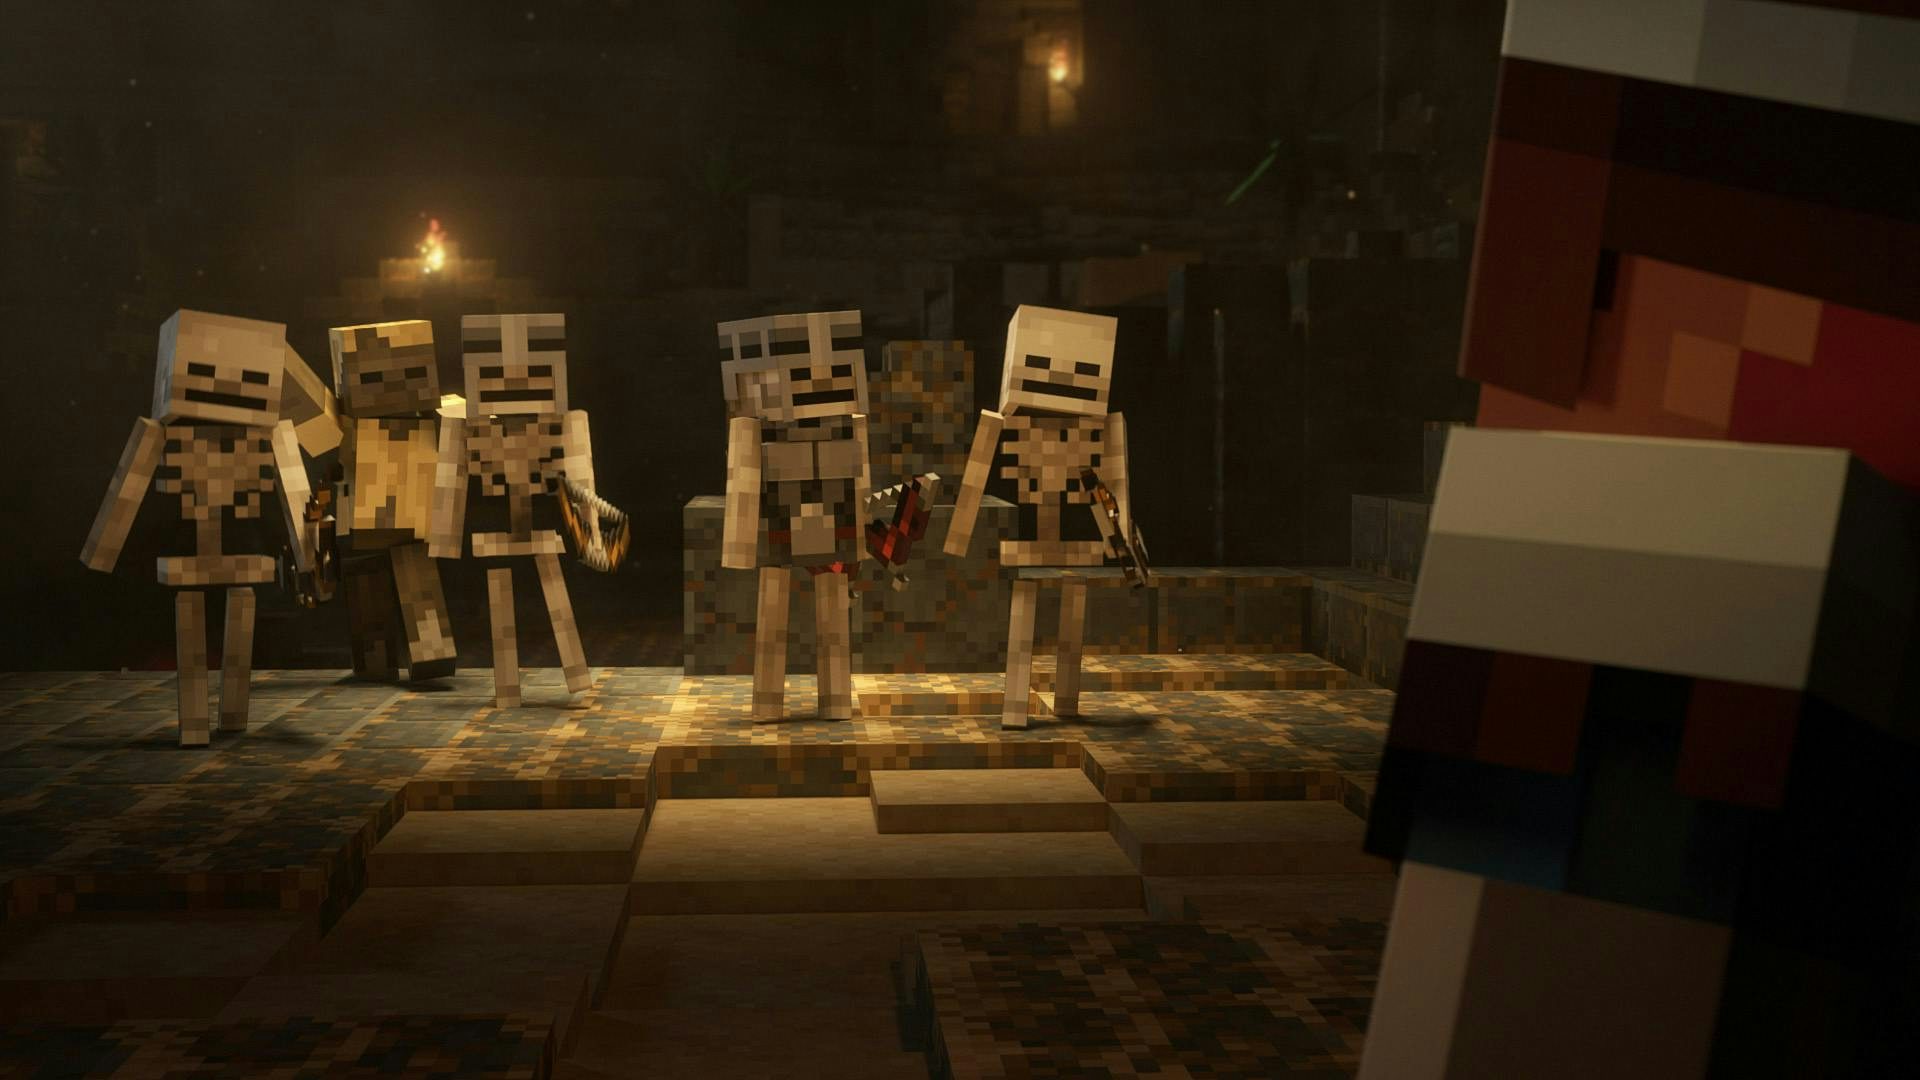 A group of skeletons and skeletons with armor walking towards valorie